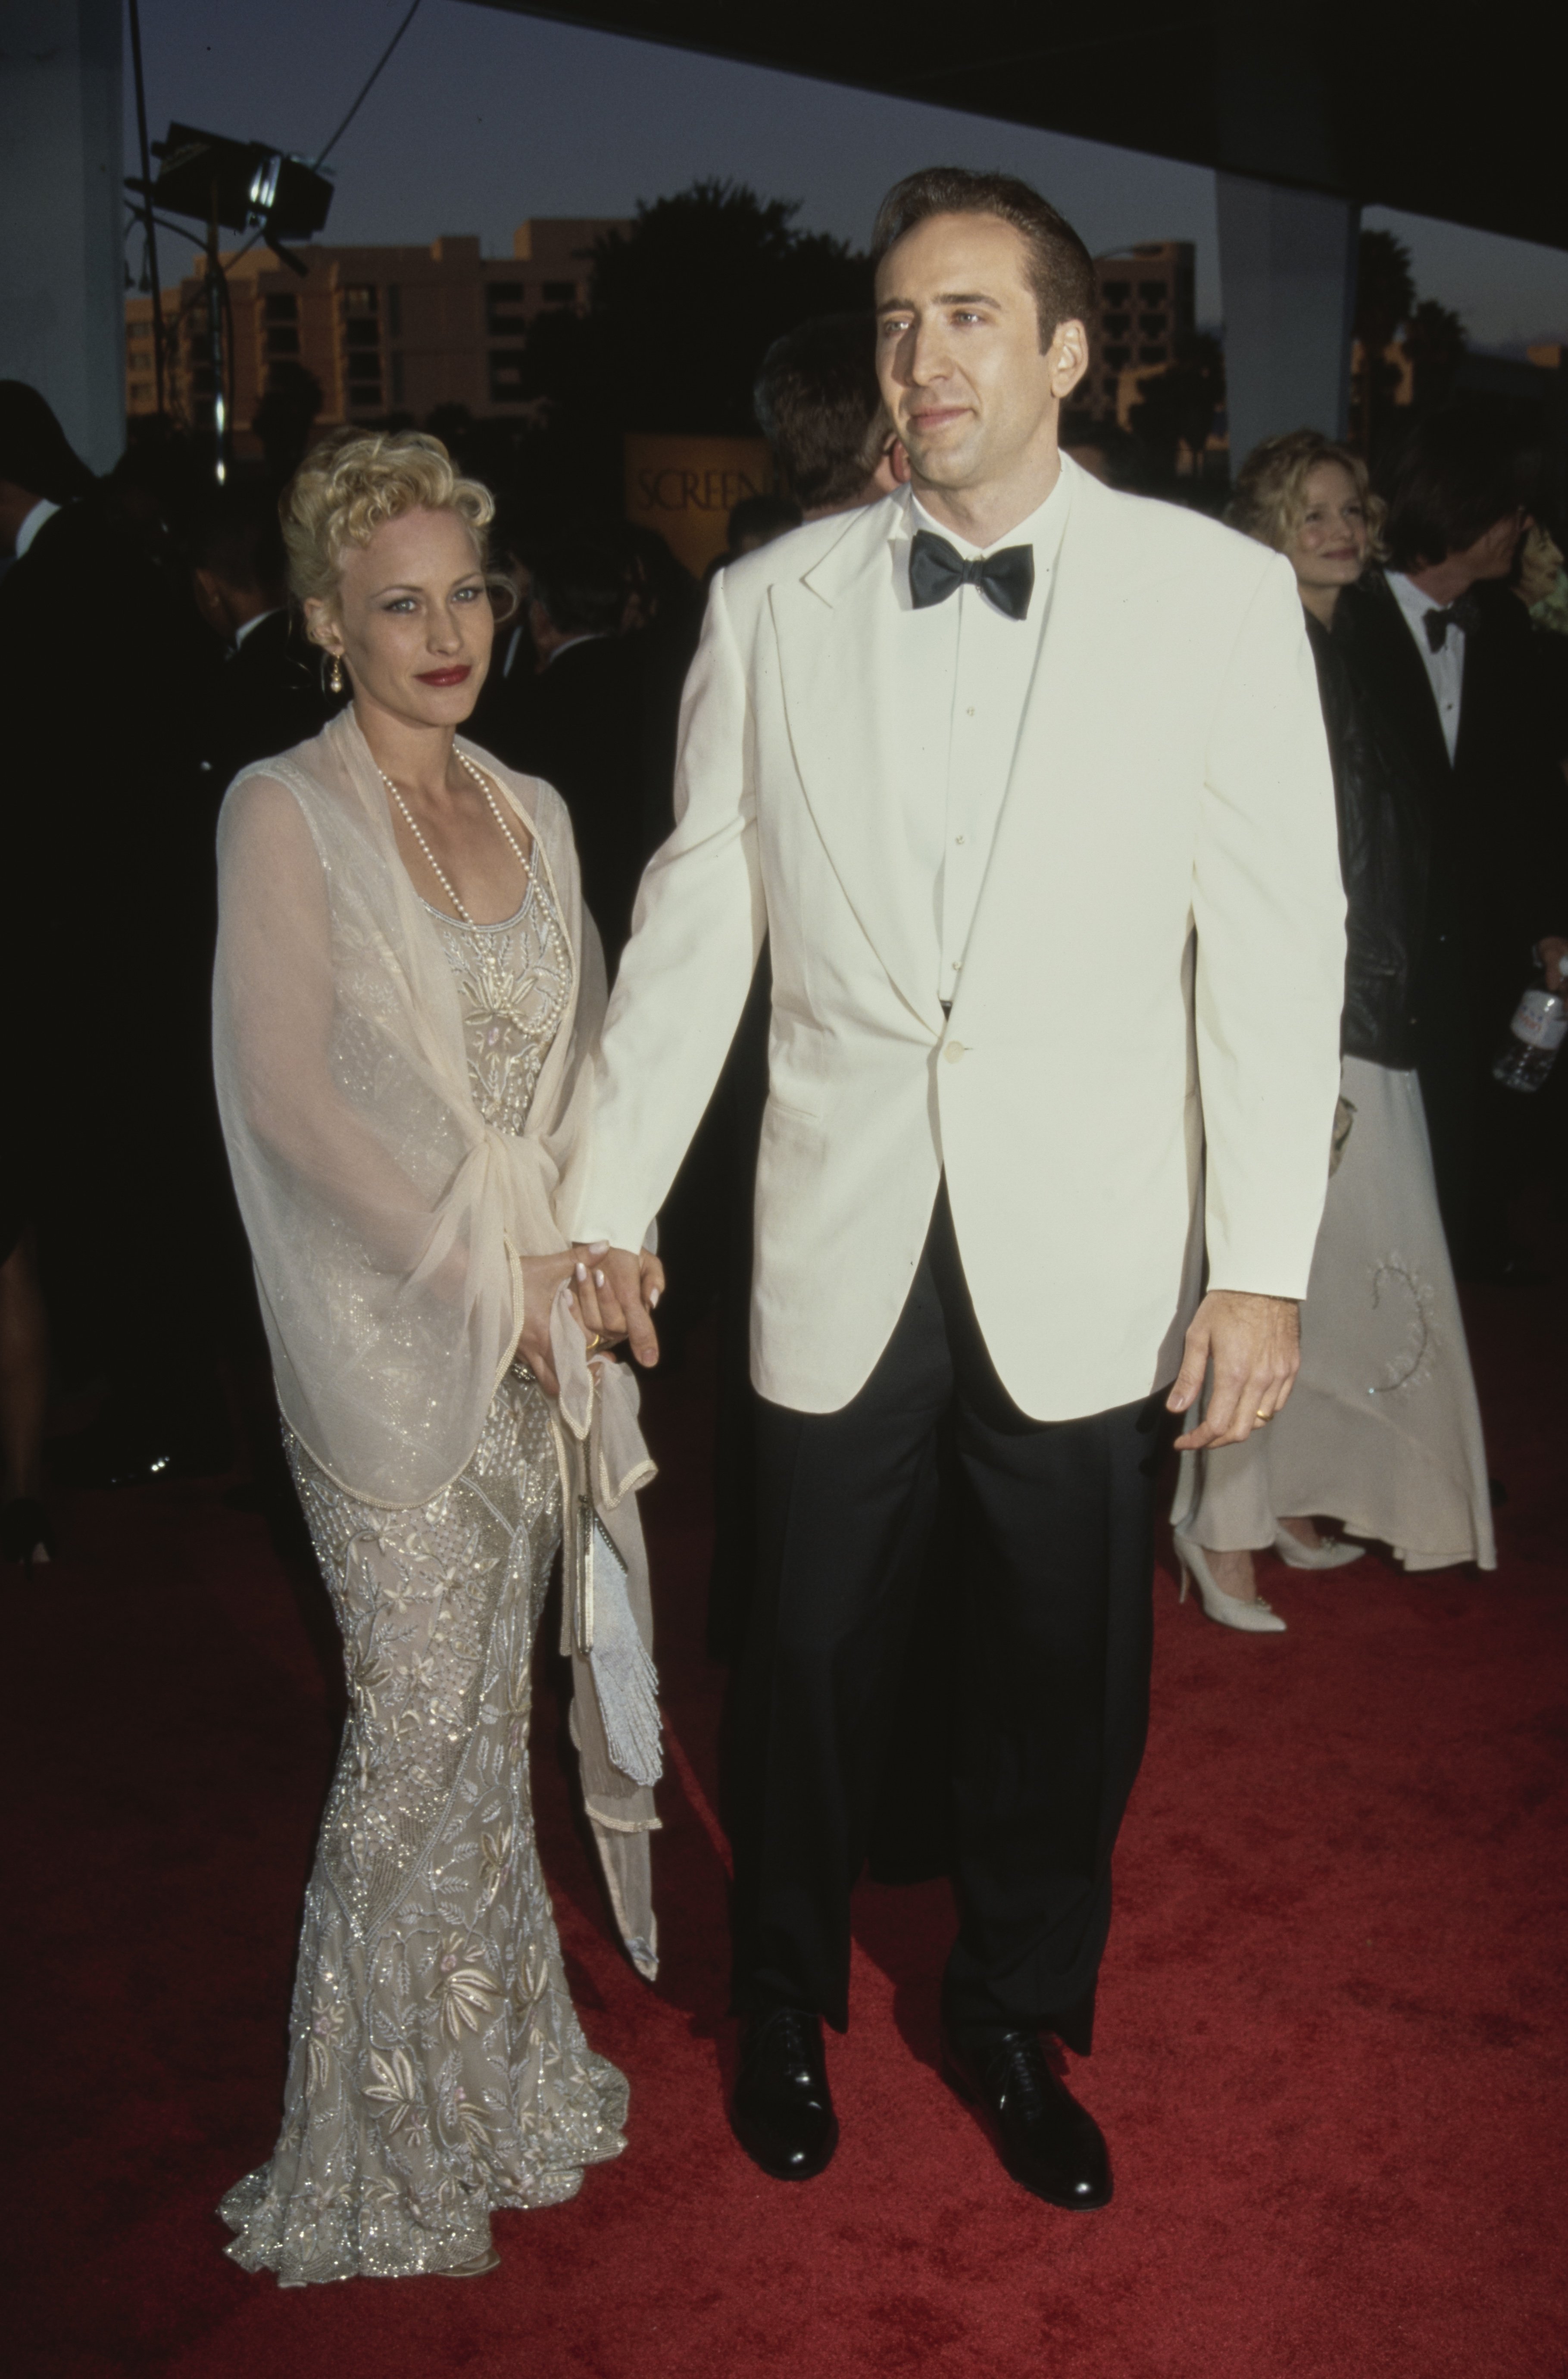 Patricia Arquette and Nicolas Cage at the Screen Actors Guild Awards, in Los Angeles, California, on February 24, 1996. | Source: Vinnie Zuffante/Michael Ochs Archive/Getty Images